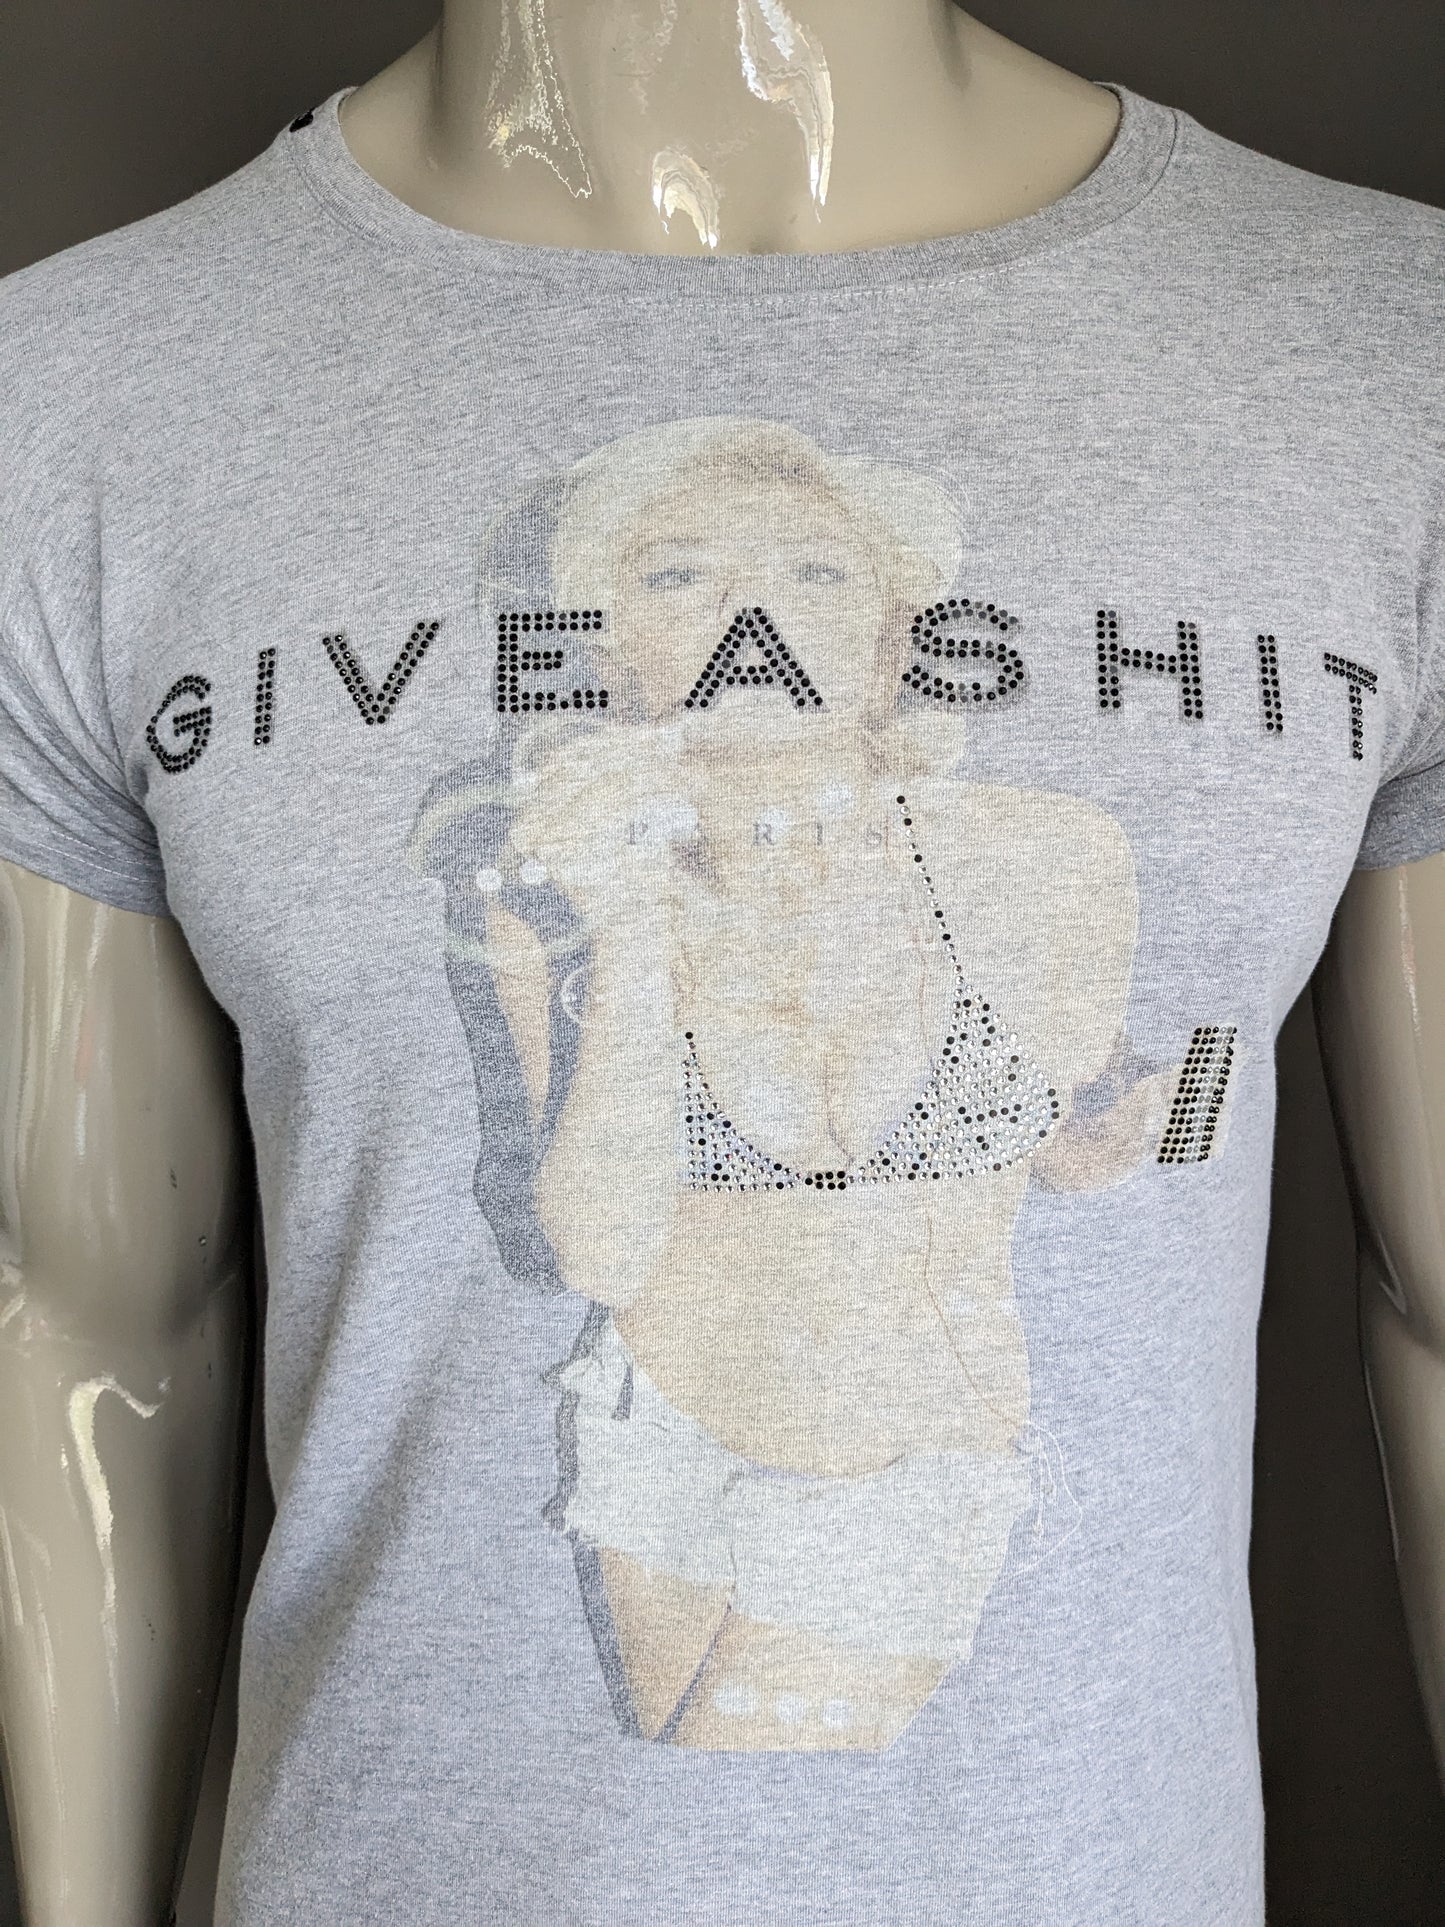 My brand shirt "give a shit". Gray with print and stones. Size M.